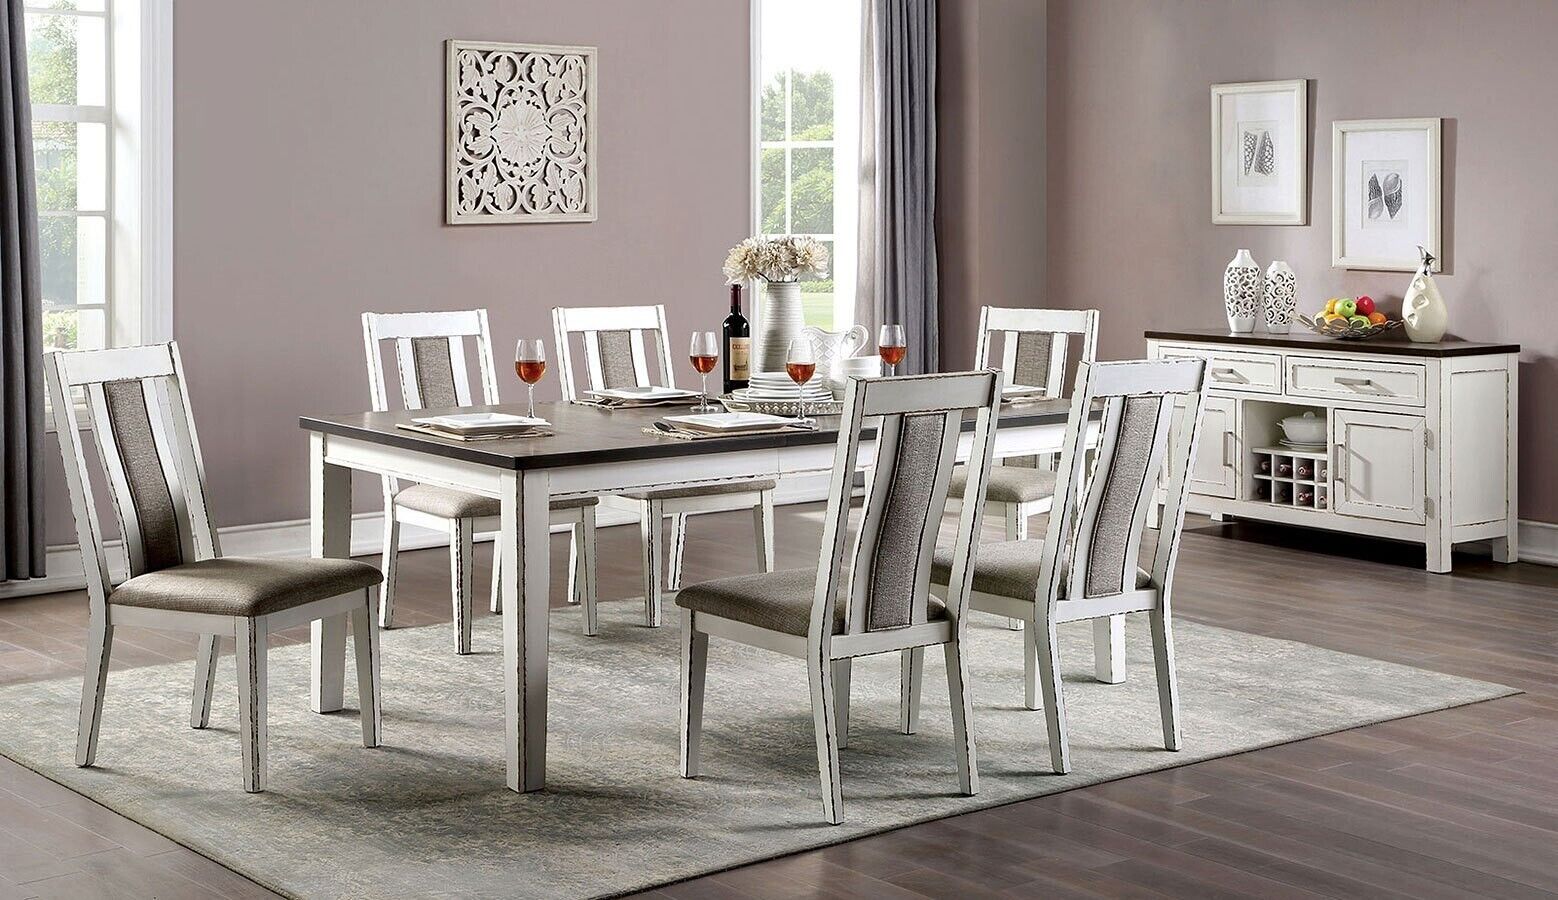 Esofastore Classic Rustic Weathered White 7pc Dining Set Dining Table 6x Side Chairs Solidwood Two Tone Fabric Cushion